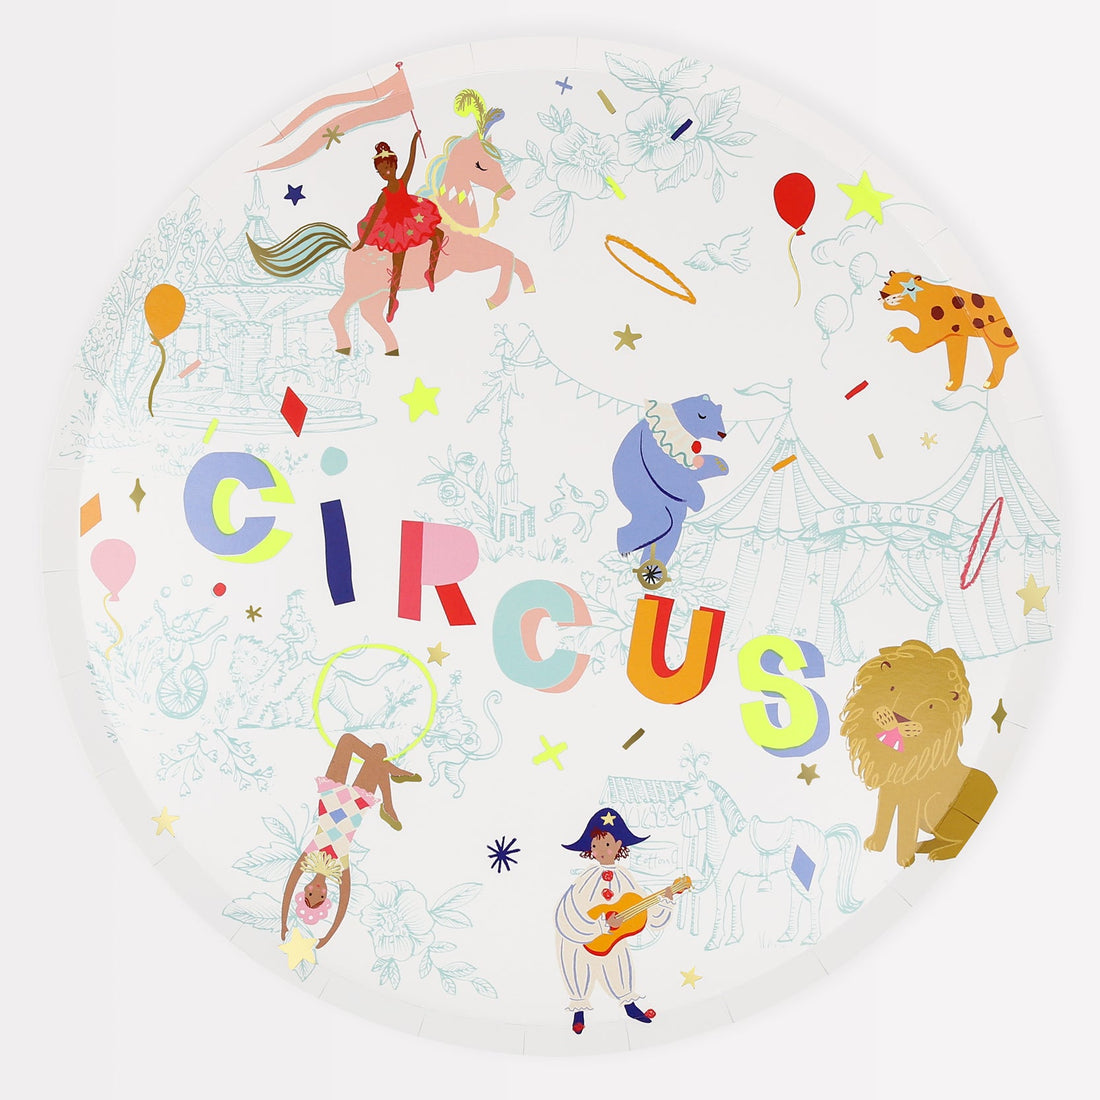 Circular circus-themed illustration with animals, performers, and the word &quot;circus&quot; in shiny gold foil details at the center on Meri Meri&